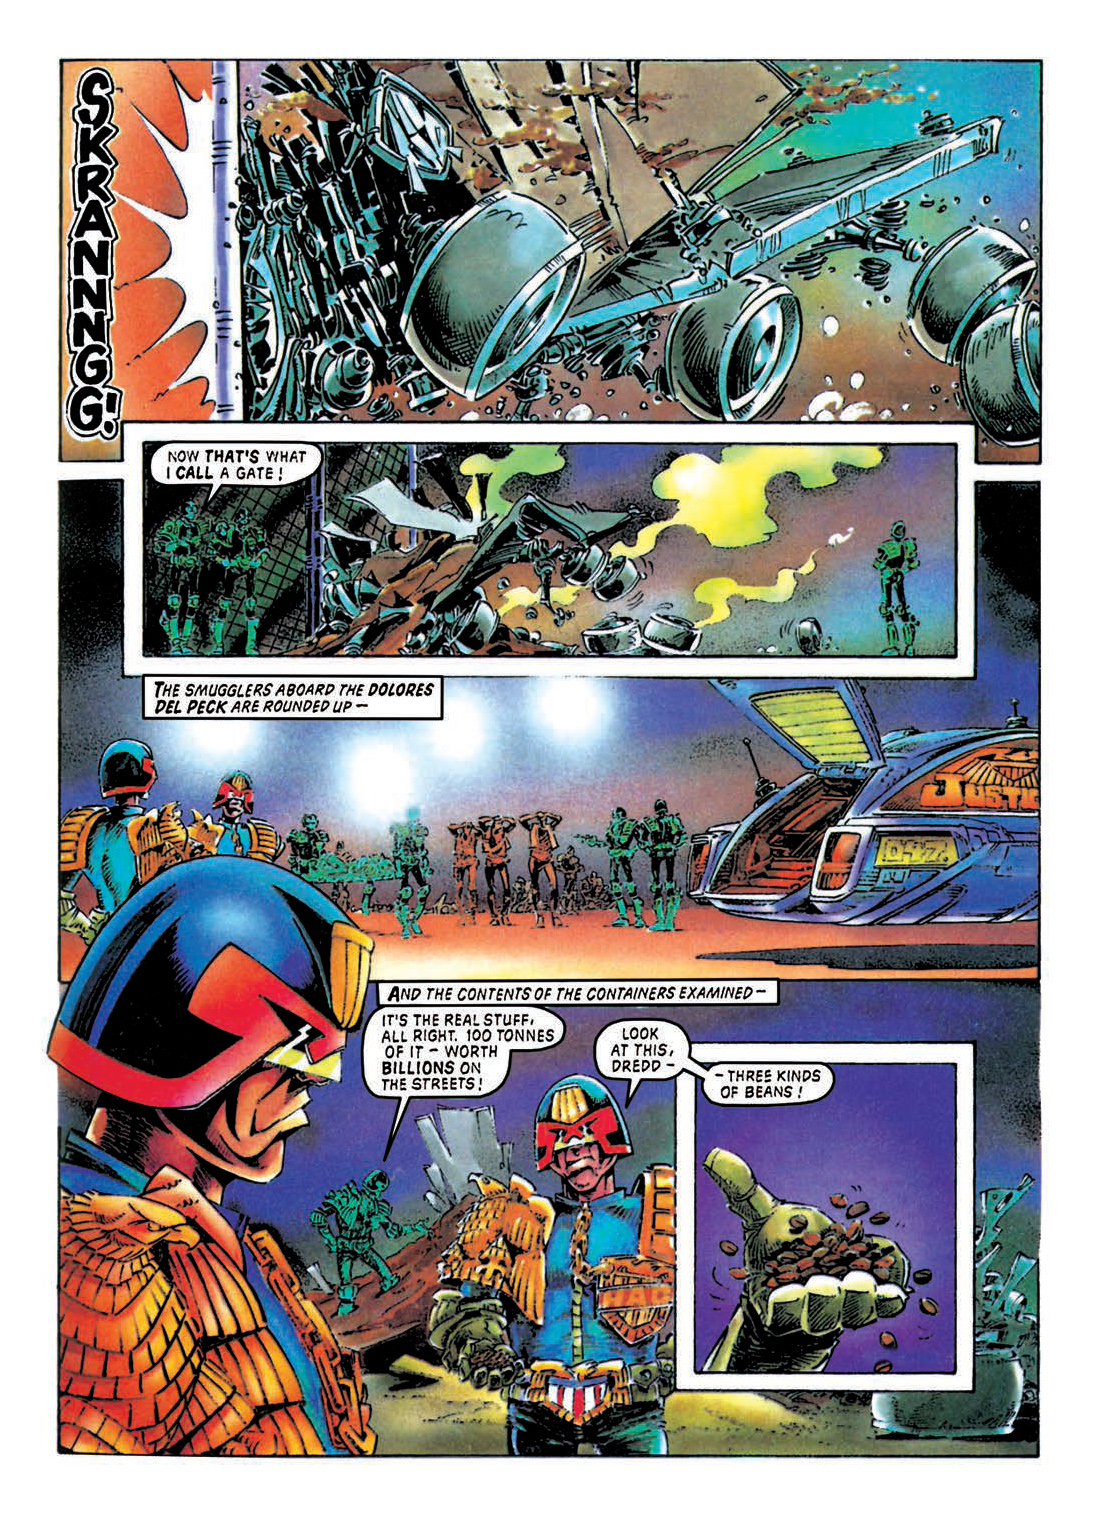 Read online Judge Dredd: The Restricted Files comic -  Issue # TPB 2 - 22